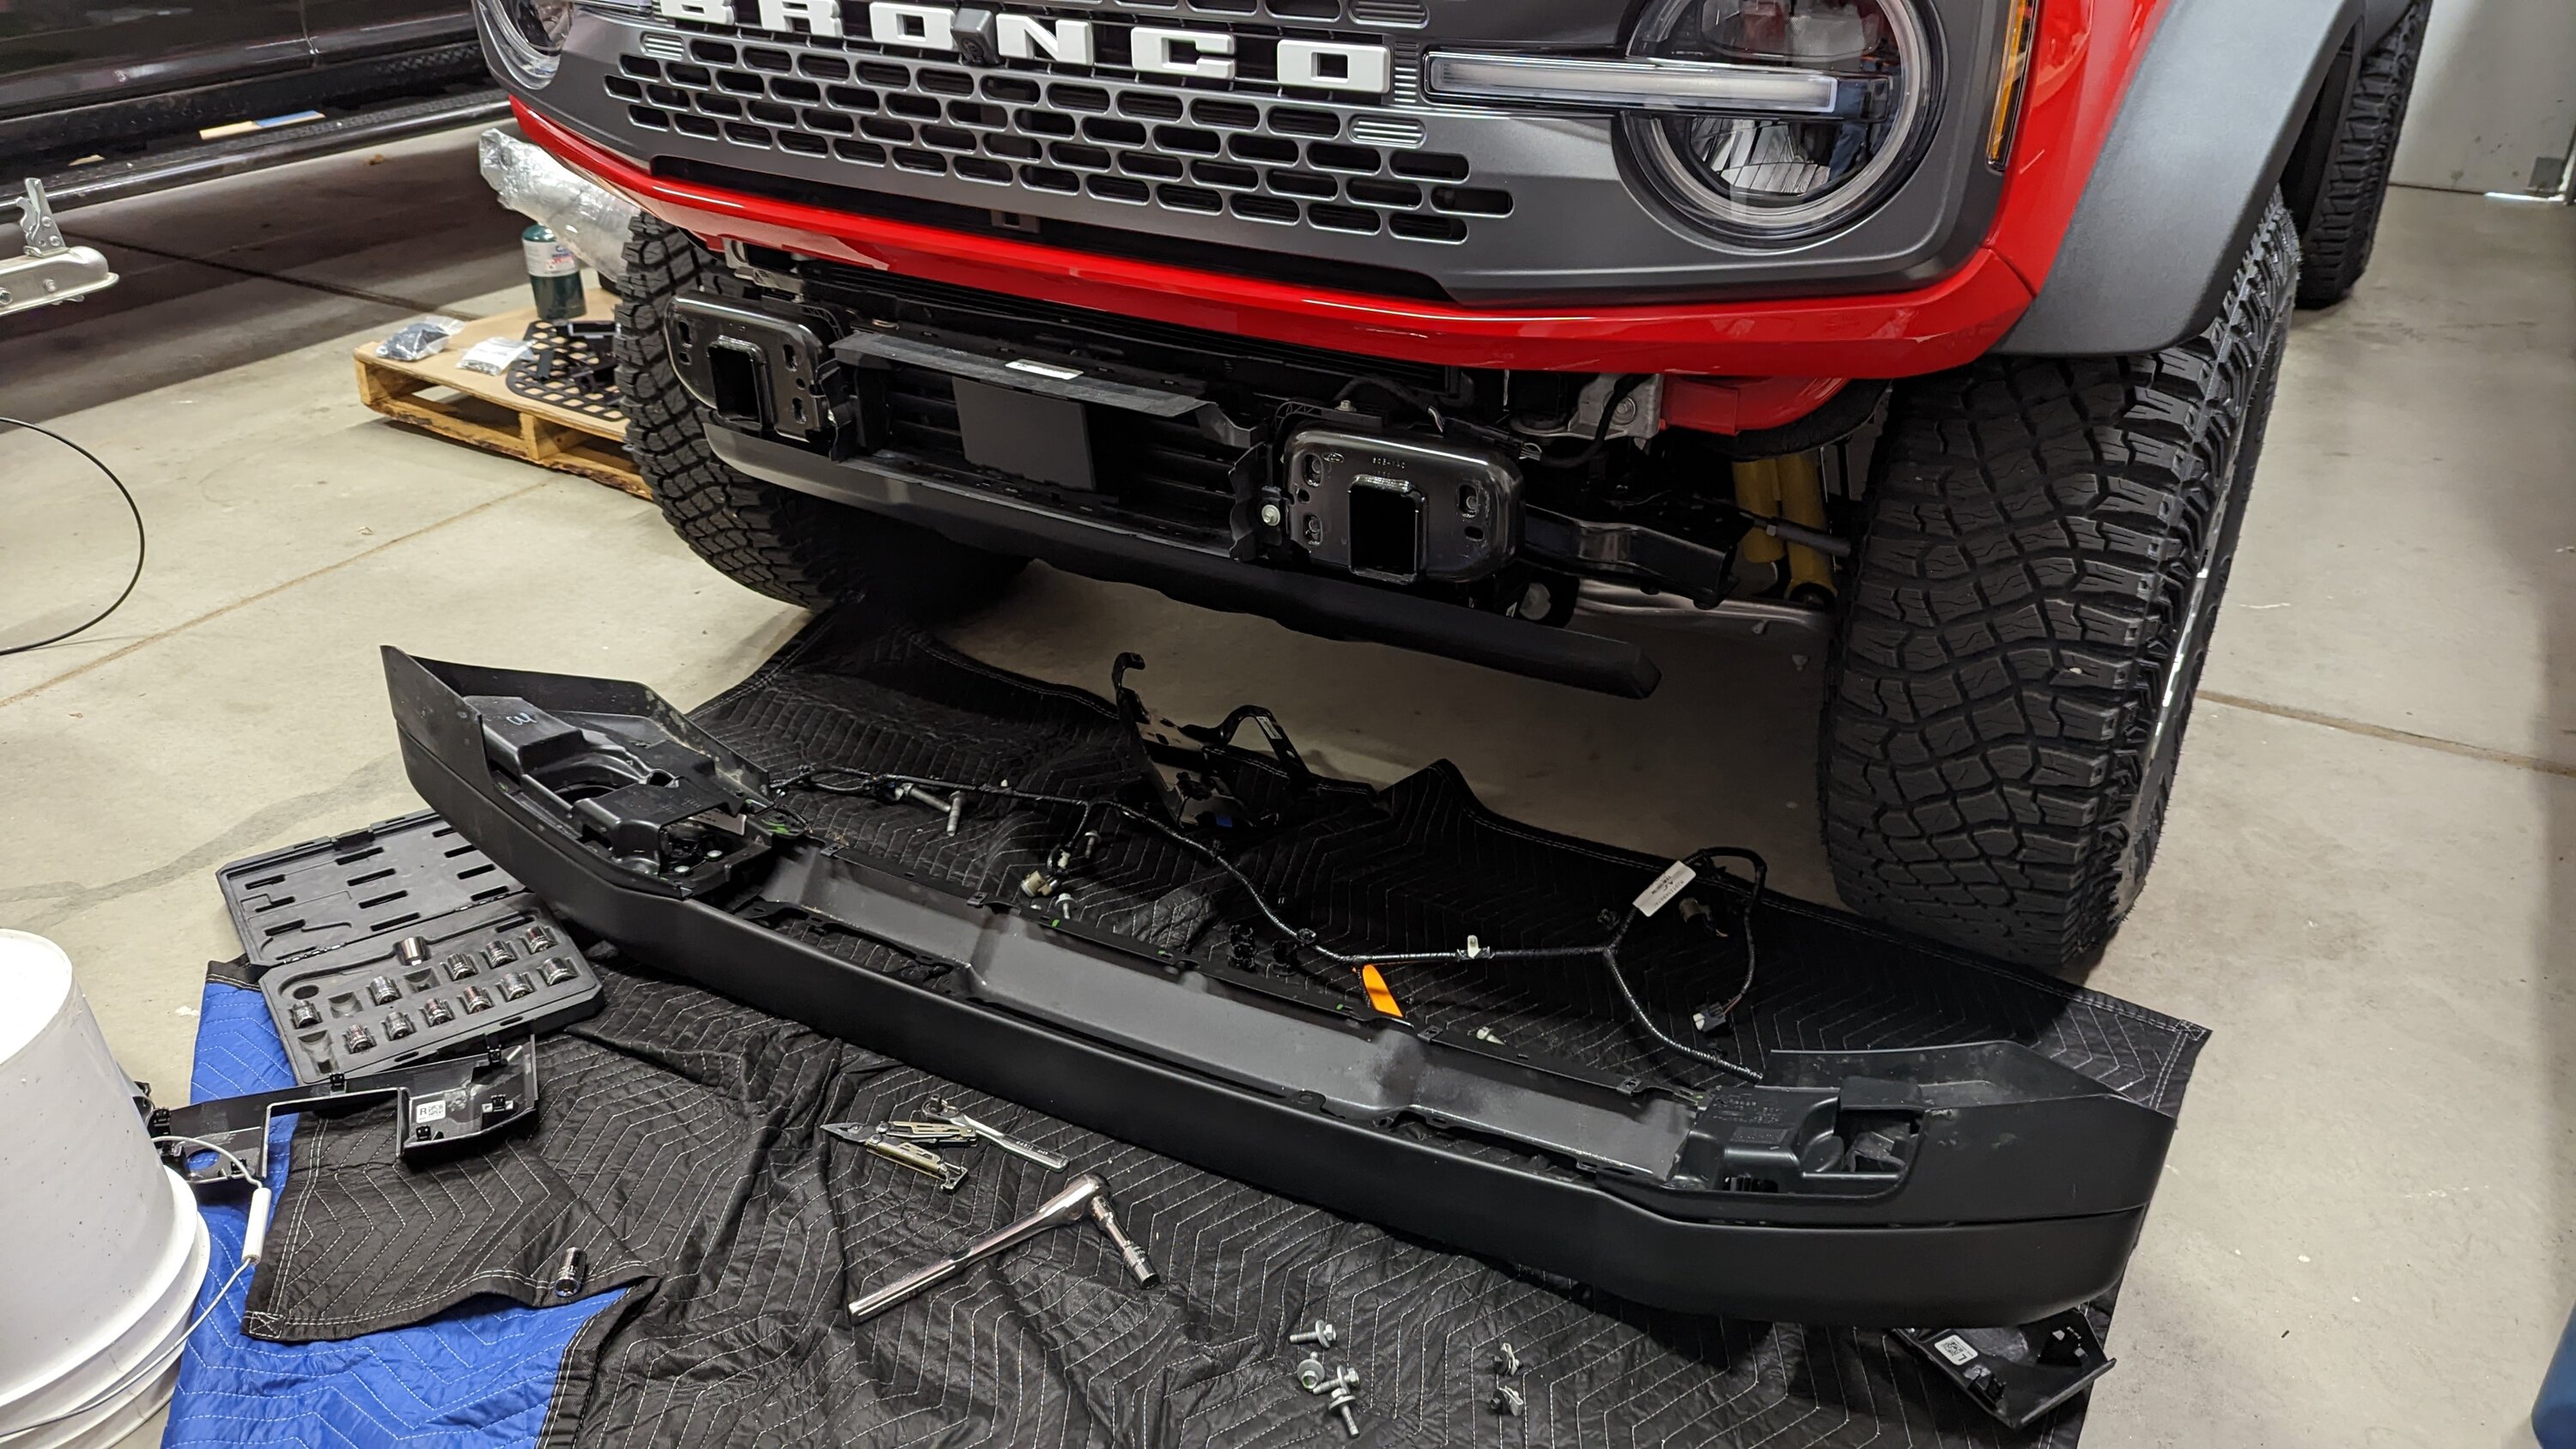 Ford Bronco JCR Vanguard bumper with Comeup Seal Slim Winch installed PXL_20221116_165148072